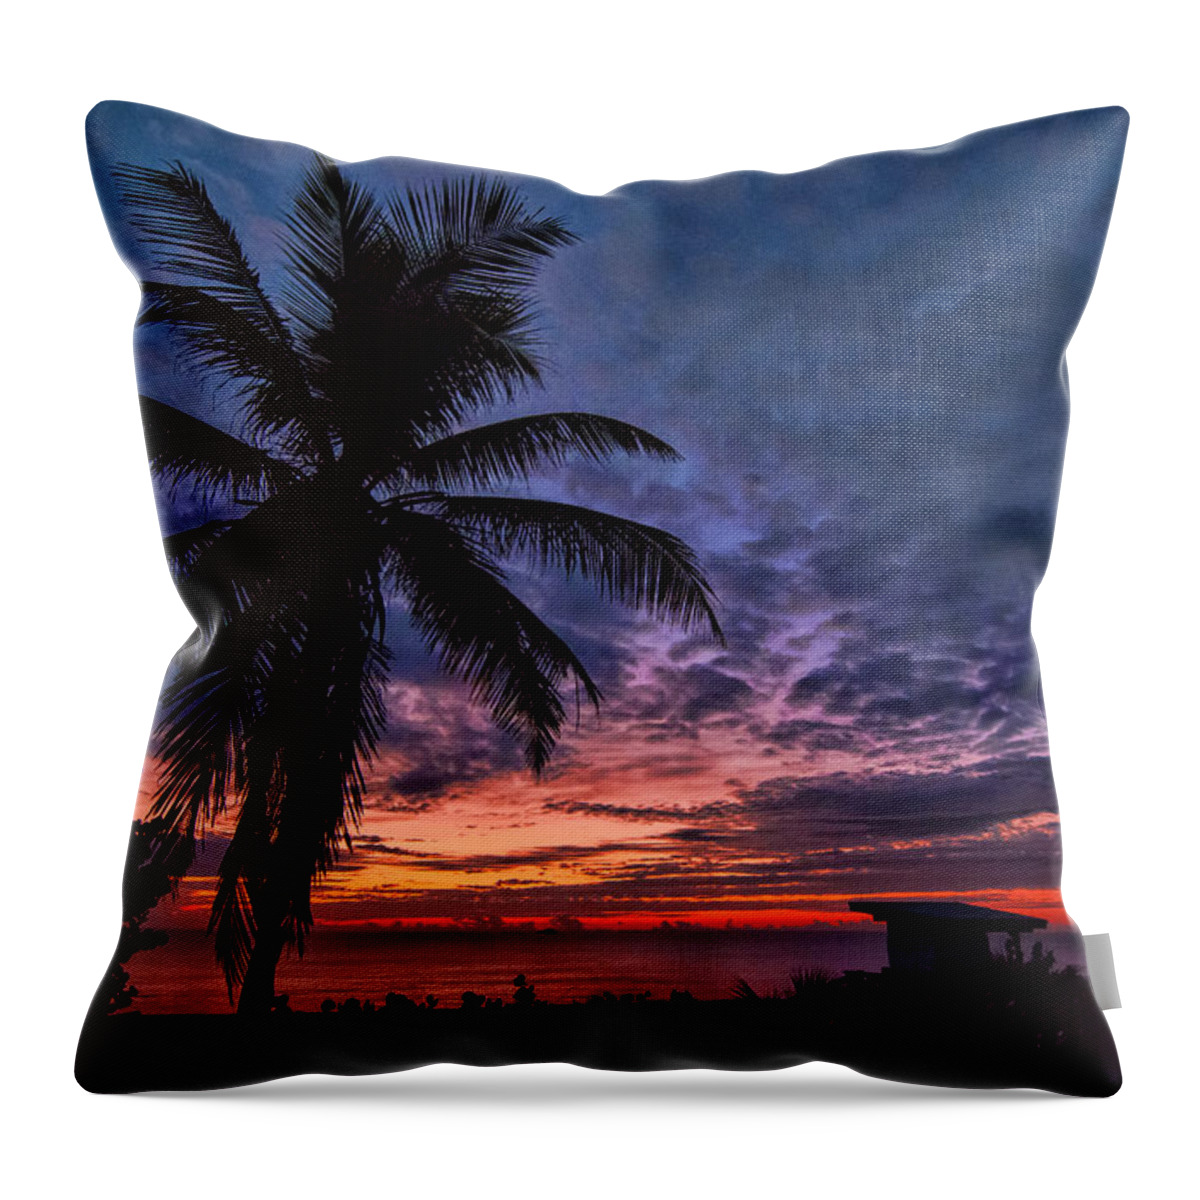 Sunrise Throw Pillow featuring the photograph Oceanfront Before Sunrise by Don Durfee